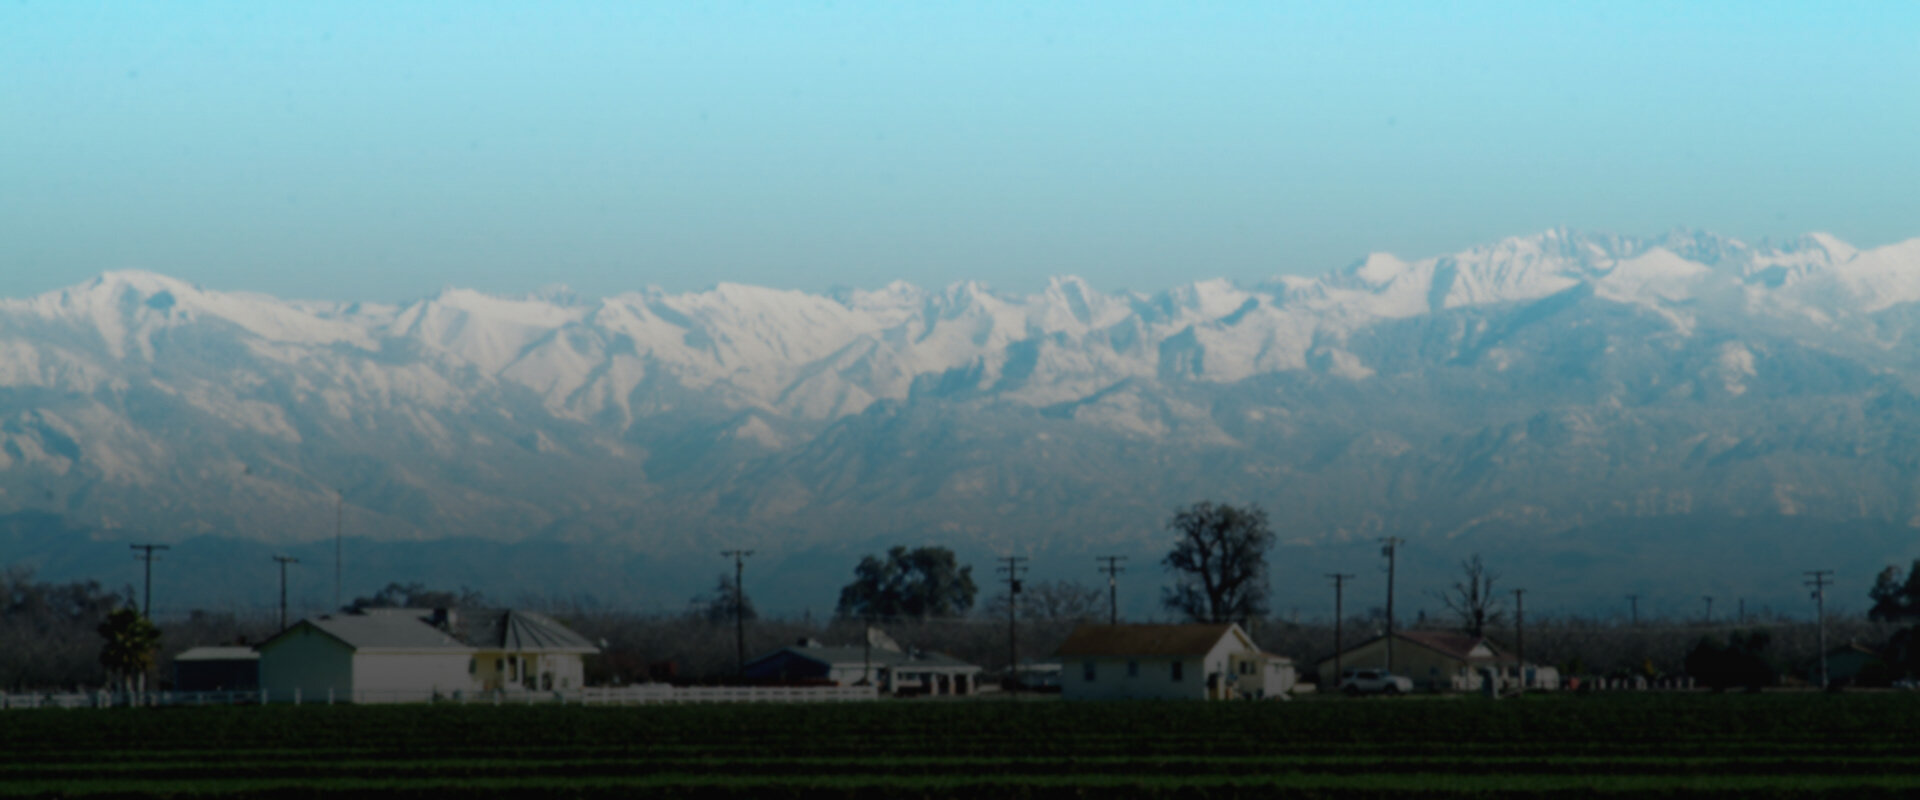 Sierra Nevada Mountains from the Central Valley